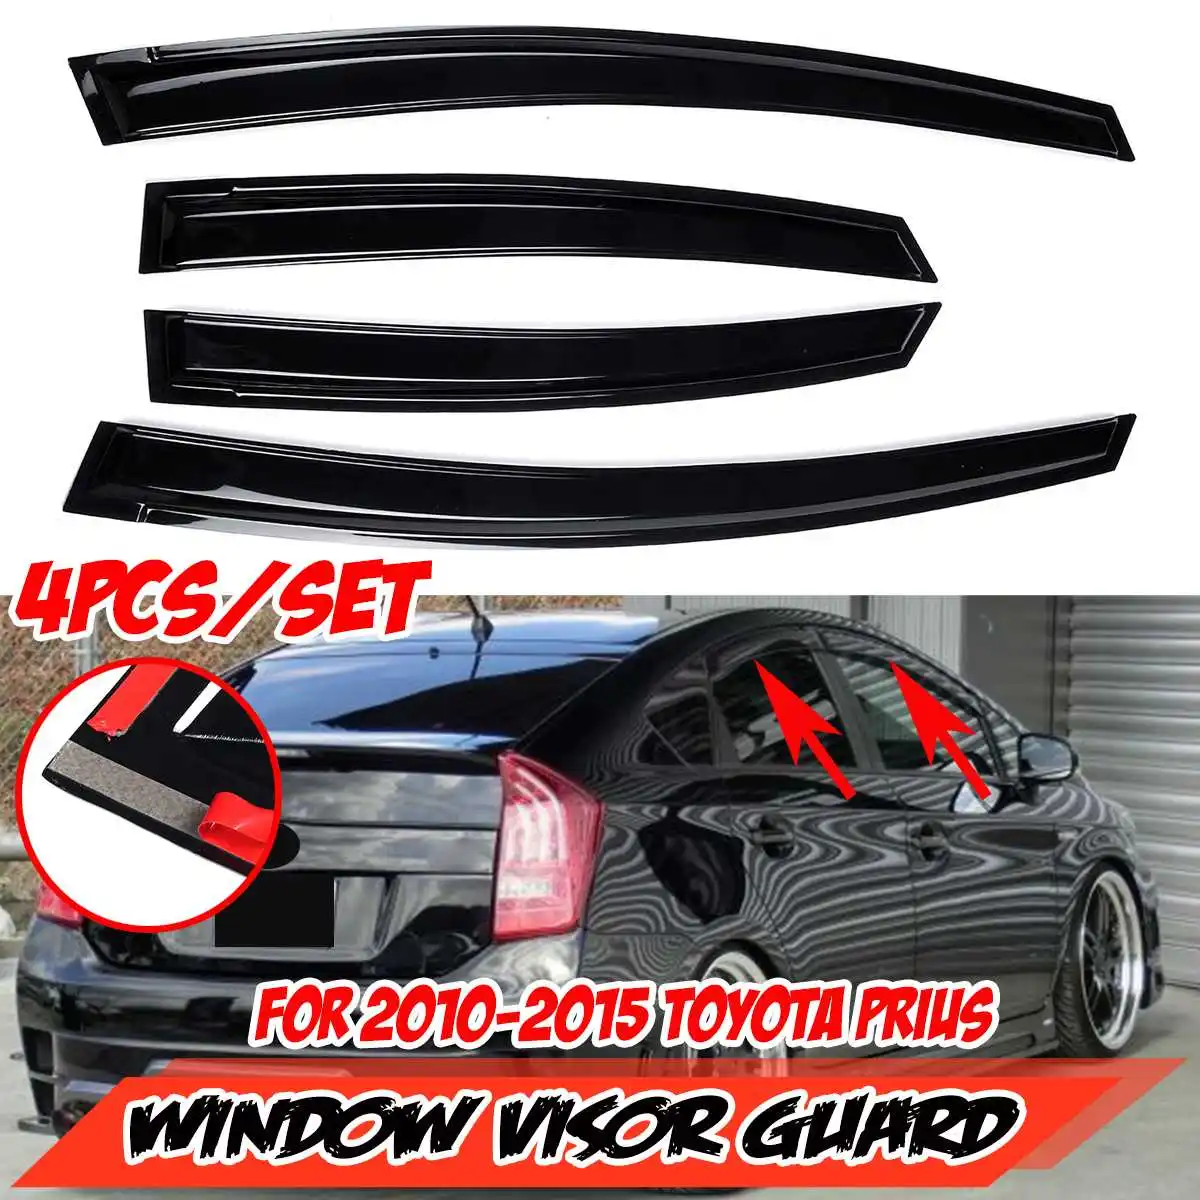 

4x Car Side Window Deflector Visor Guard Vent Rain Guard For TOYOTA For PRIUS 2010-2015 Door Visor Cover Trim Awnings Shelters